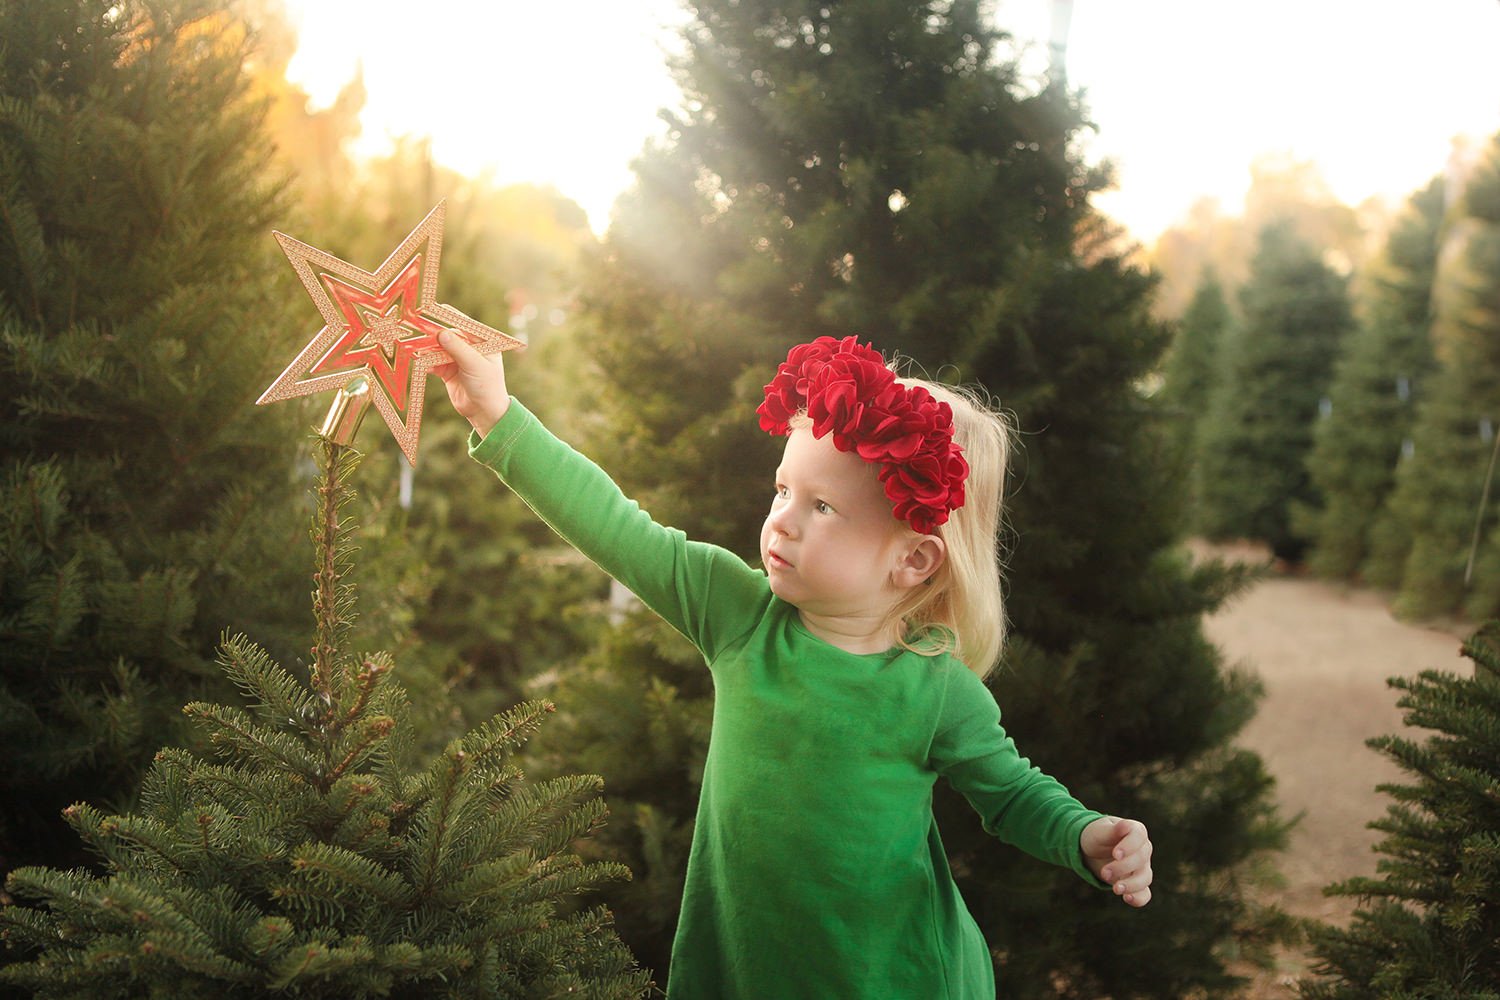 Looking for places to hide the elf on the shelf? These 24 ideas are just ADORABLE!